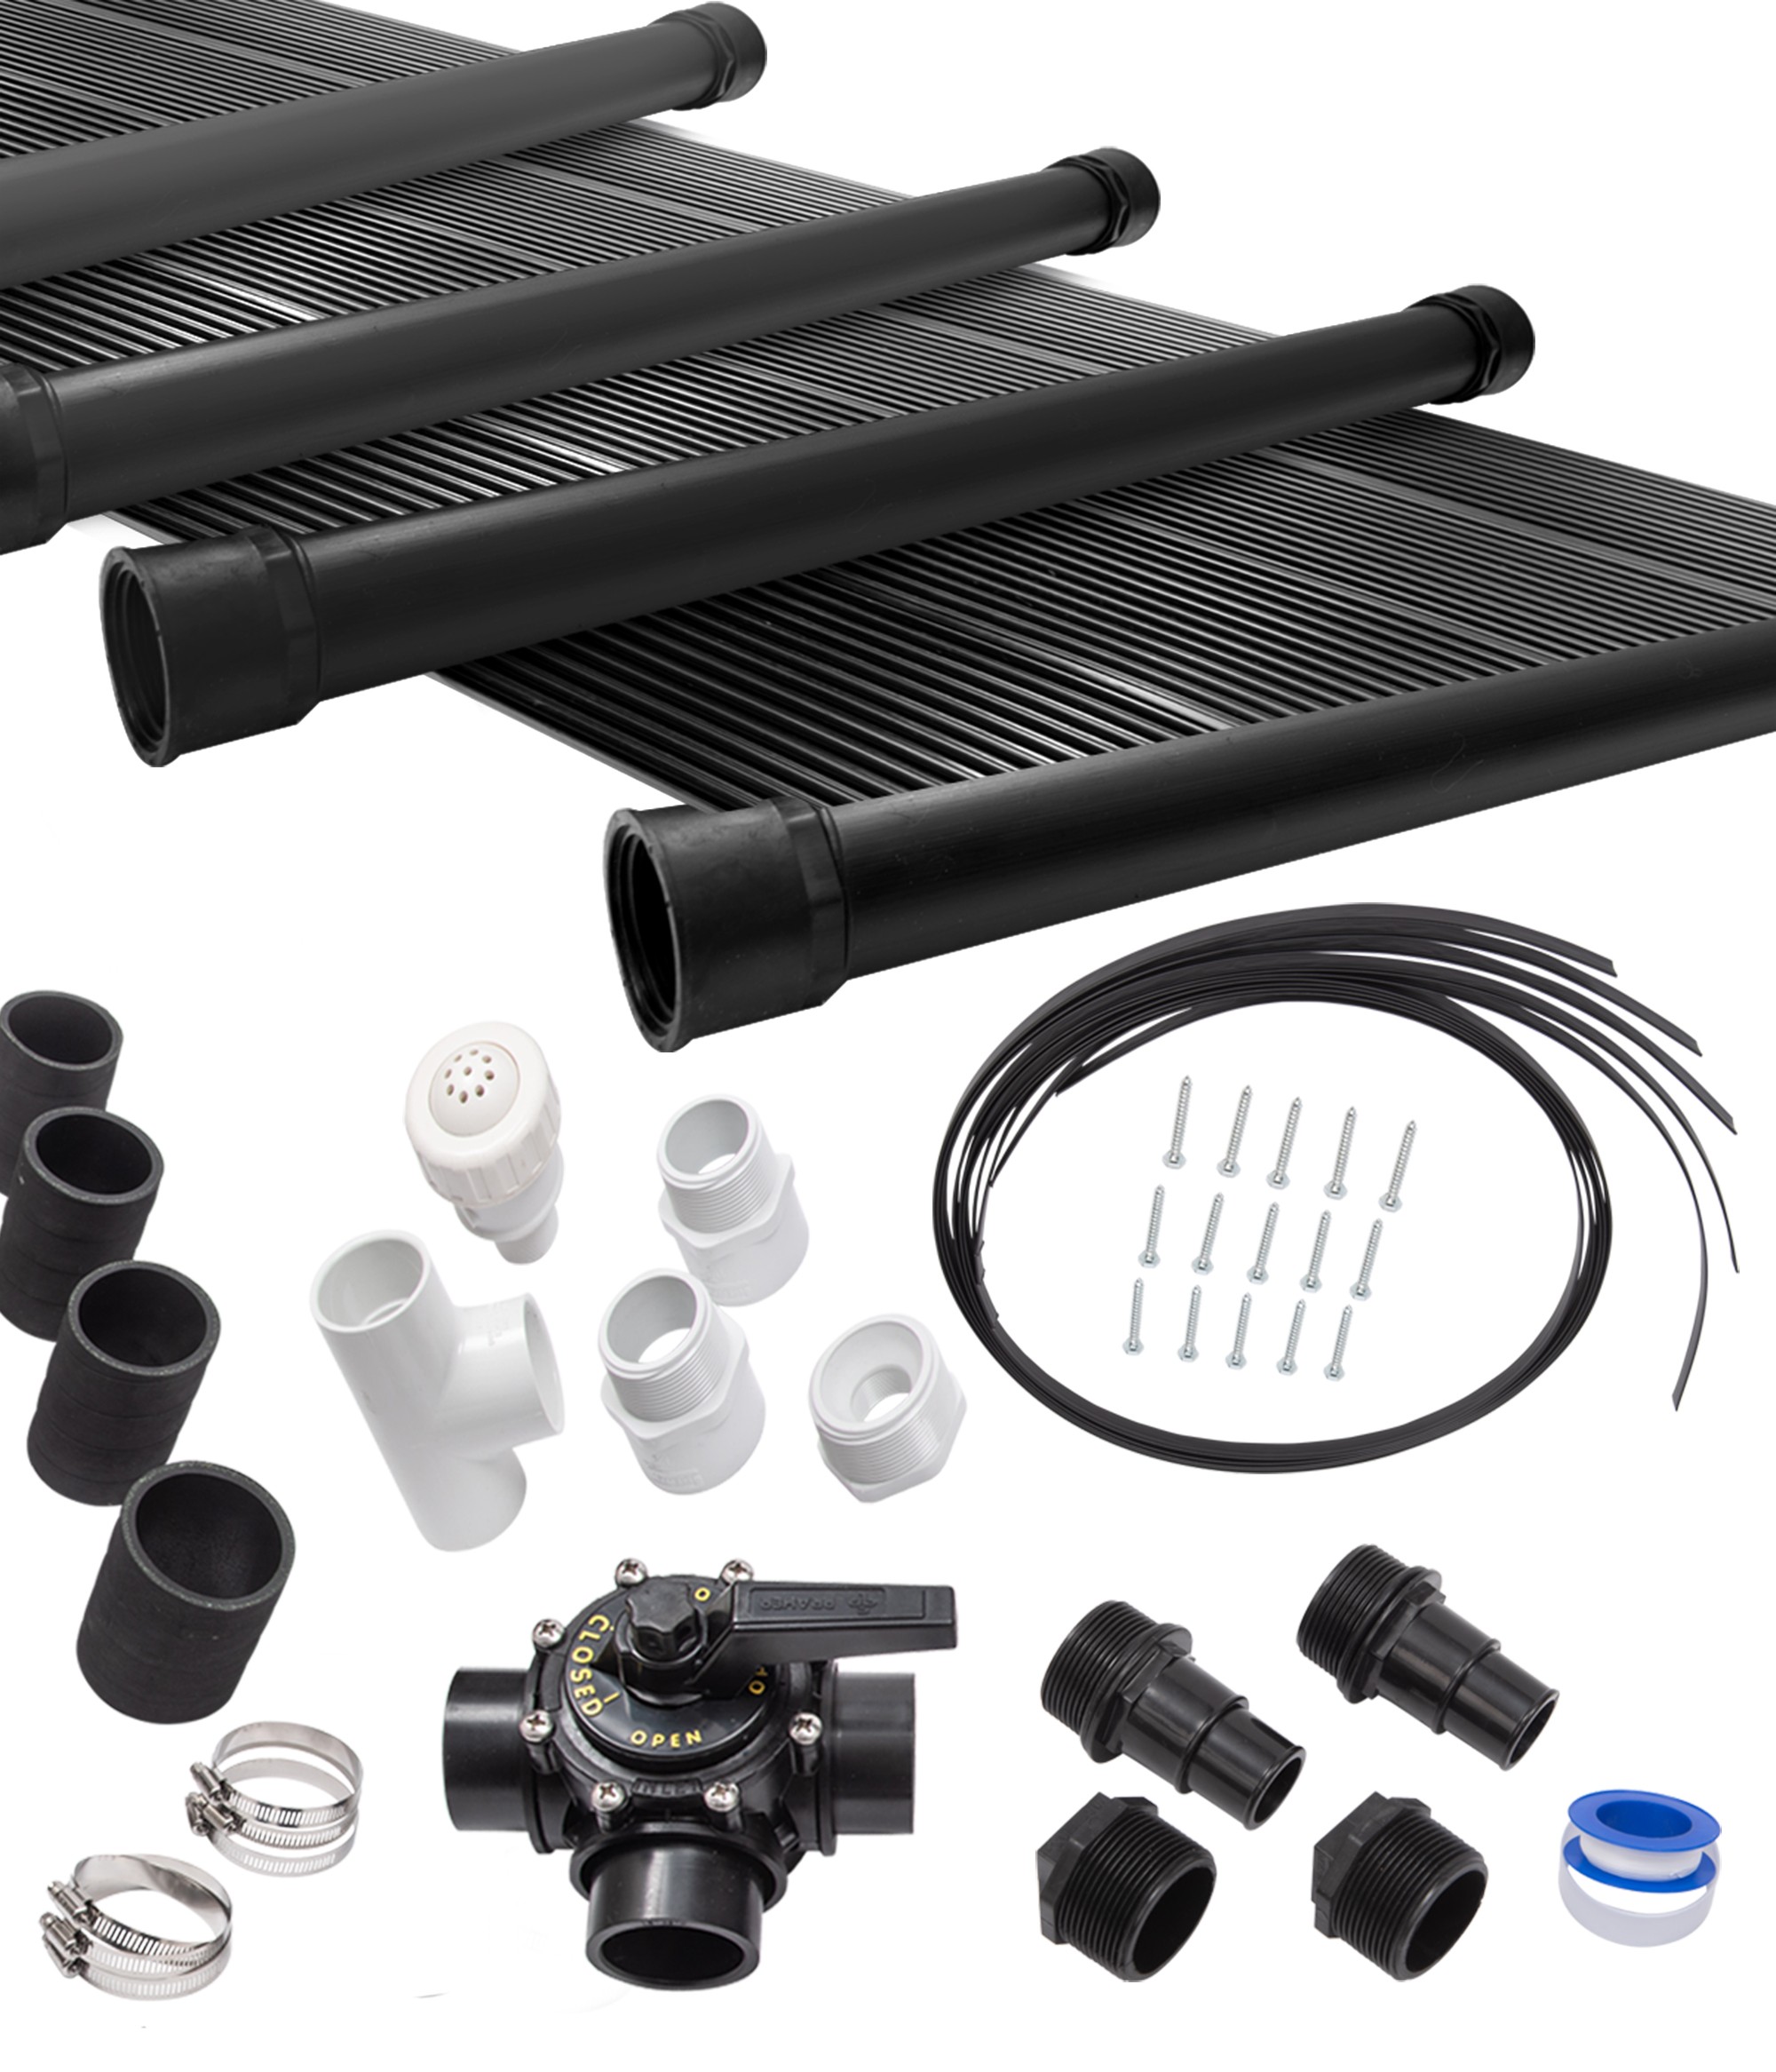 18-2X10' SunQuest Solar Swimming Pool Heater Complete System with Roof Kits